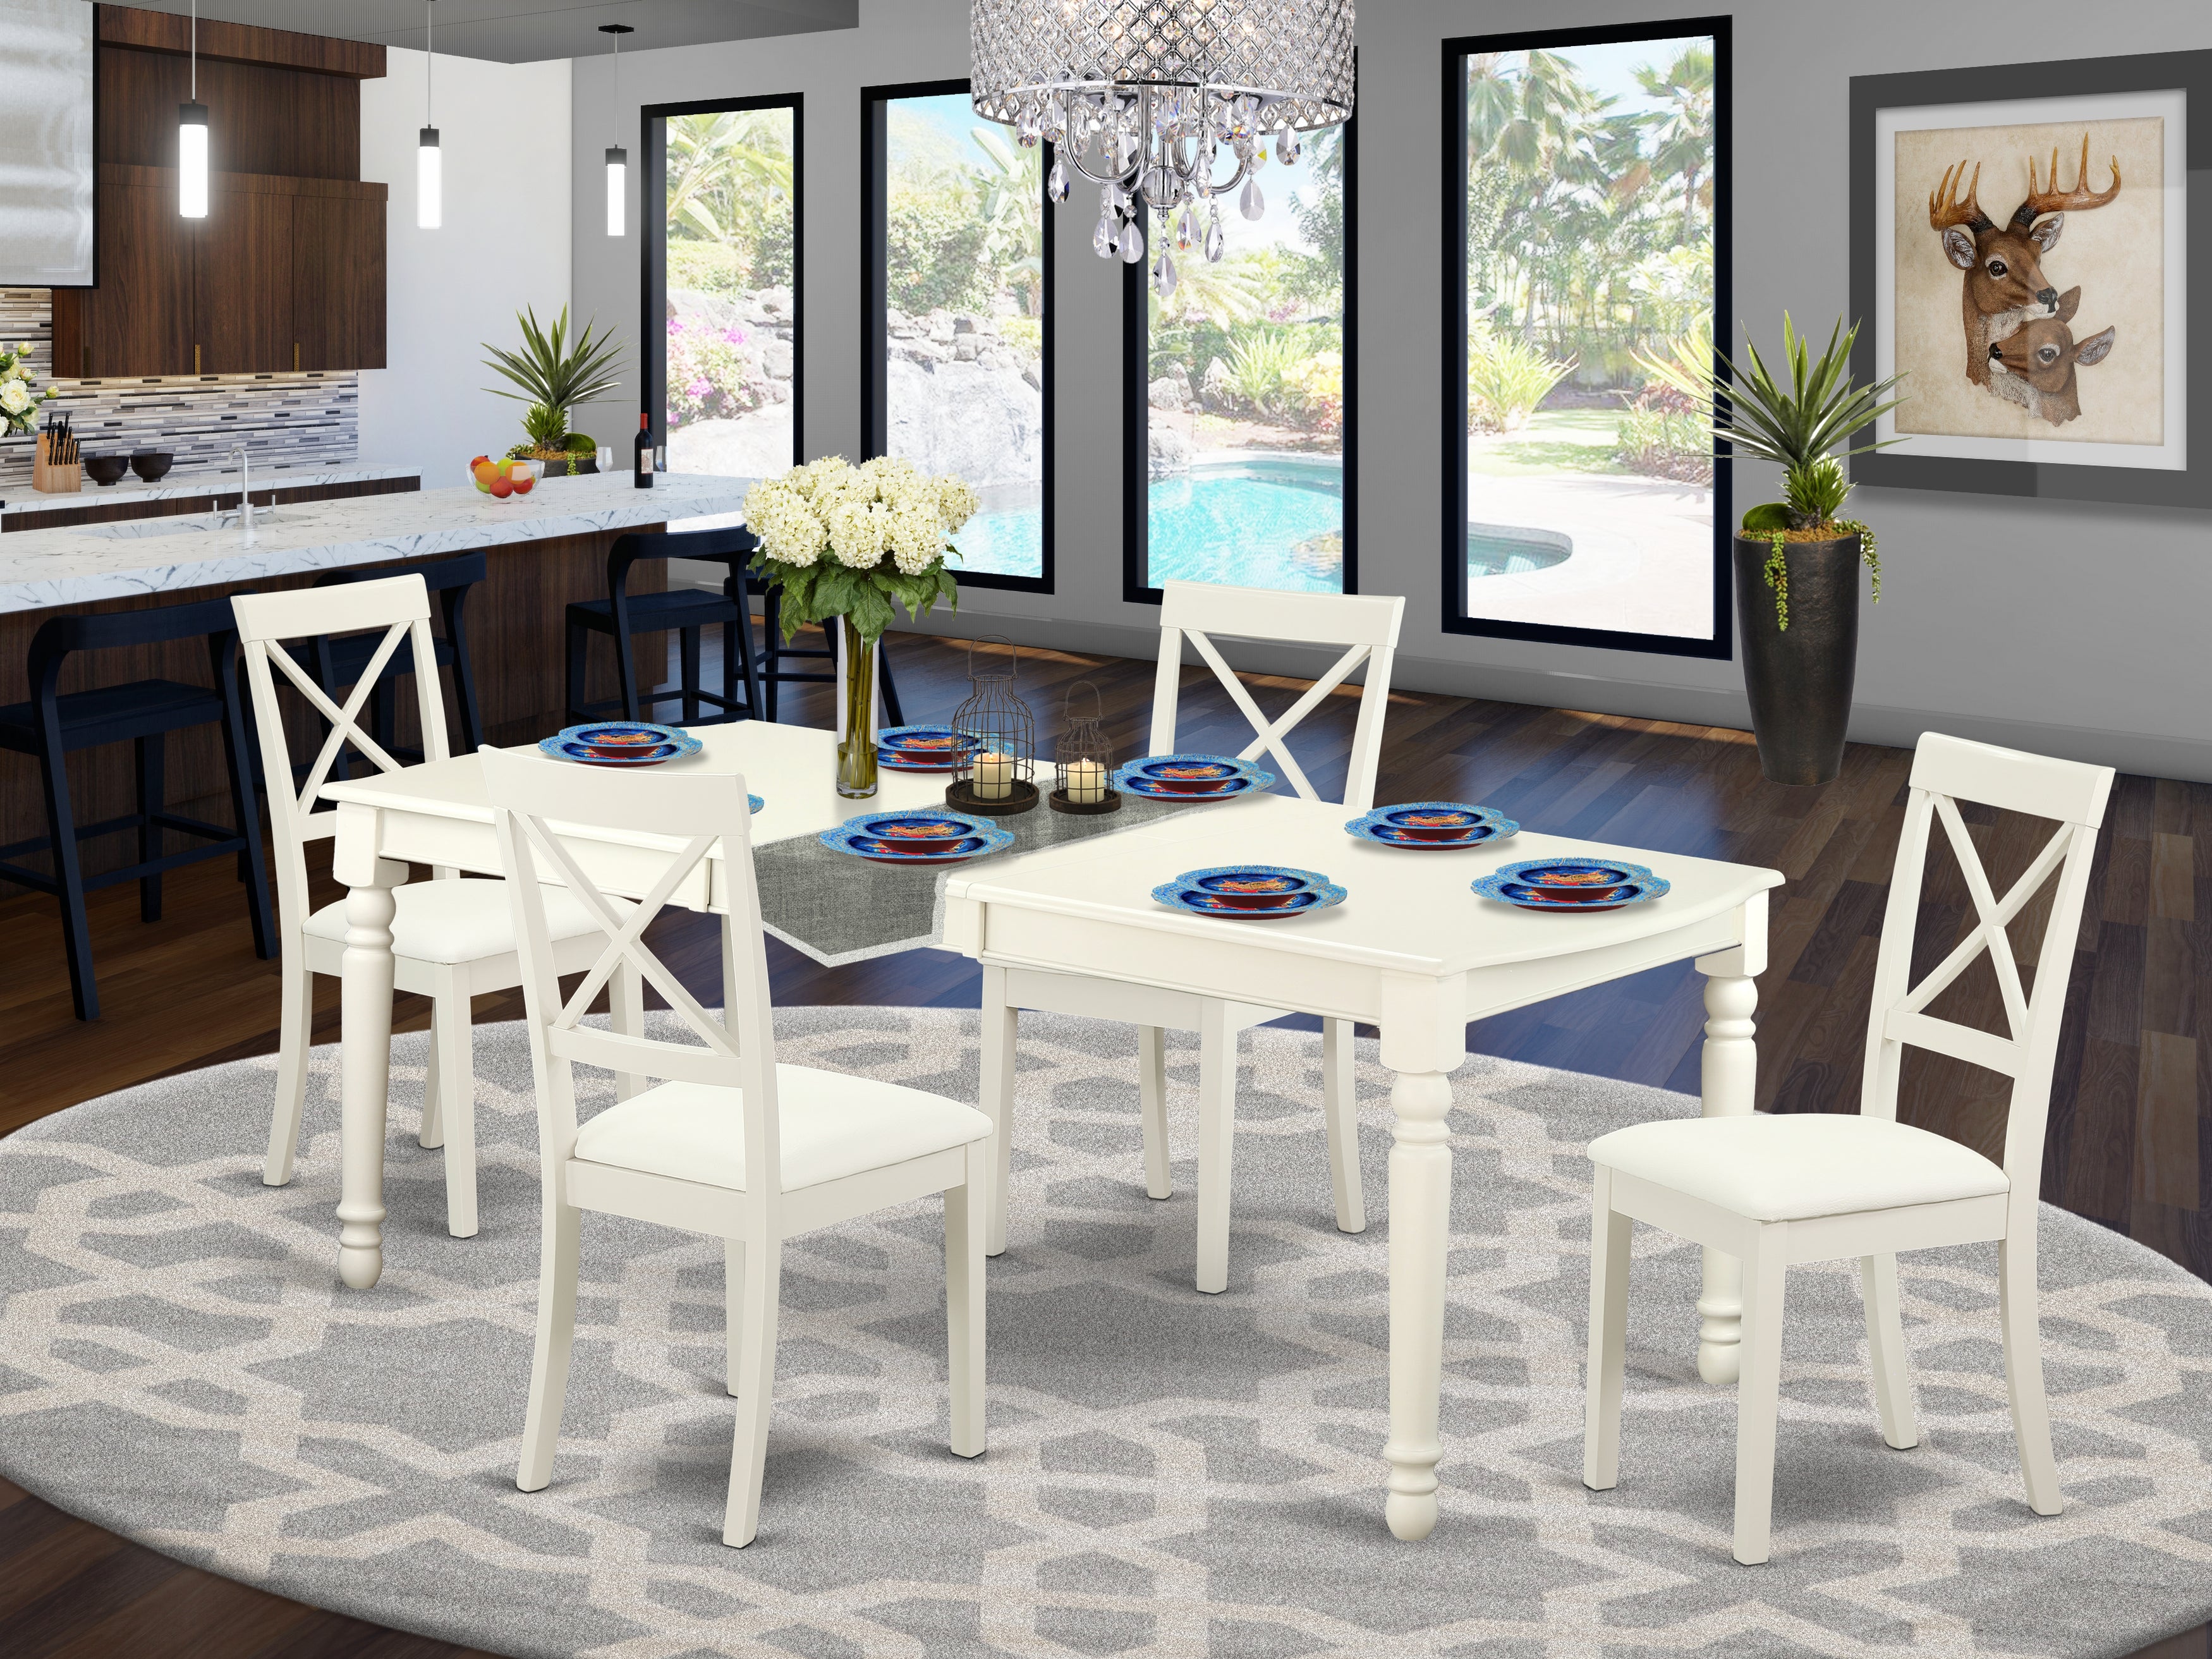 DOBO5-LWH-LC 5 PC Dining table set-Dining table and 4 faux leather seat kitchen chairs in linen white